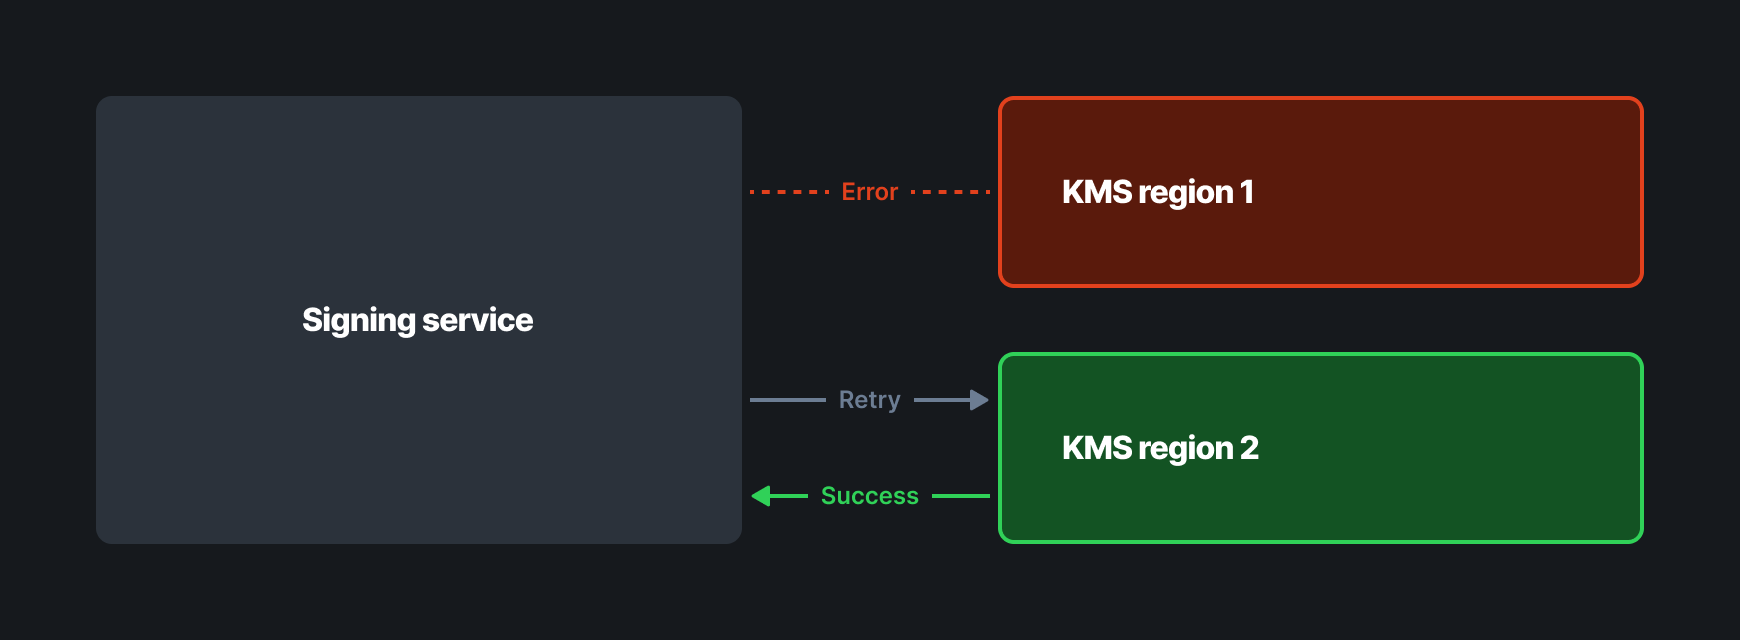 A diagram showing a failed request to KMS Region 1 that was retried against KMS Region 2, where it succeeds